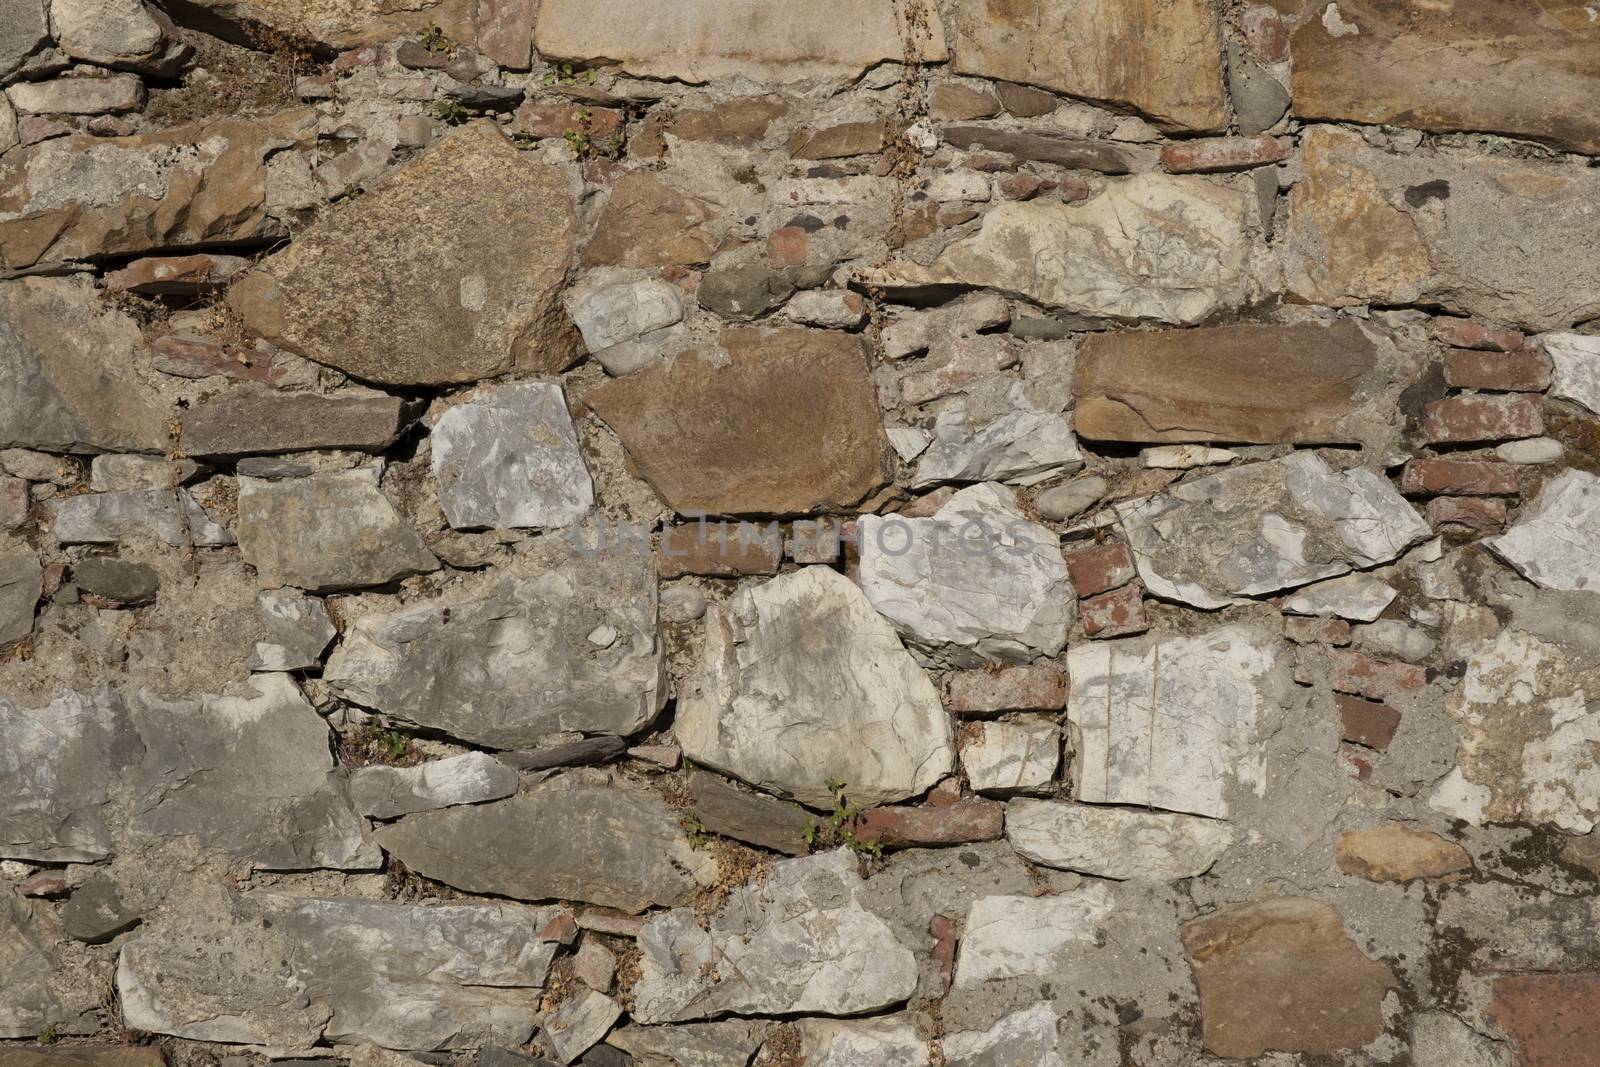 Wall texture of ancient old brick stone. Outdoor exterior castle facade with destroyed uneven pattern of shabby rock. Solid wall sandstone structure background. Grunge surface useful for 3d texturing